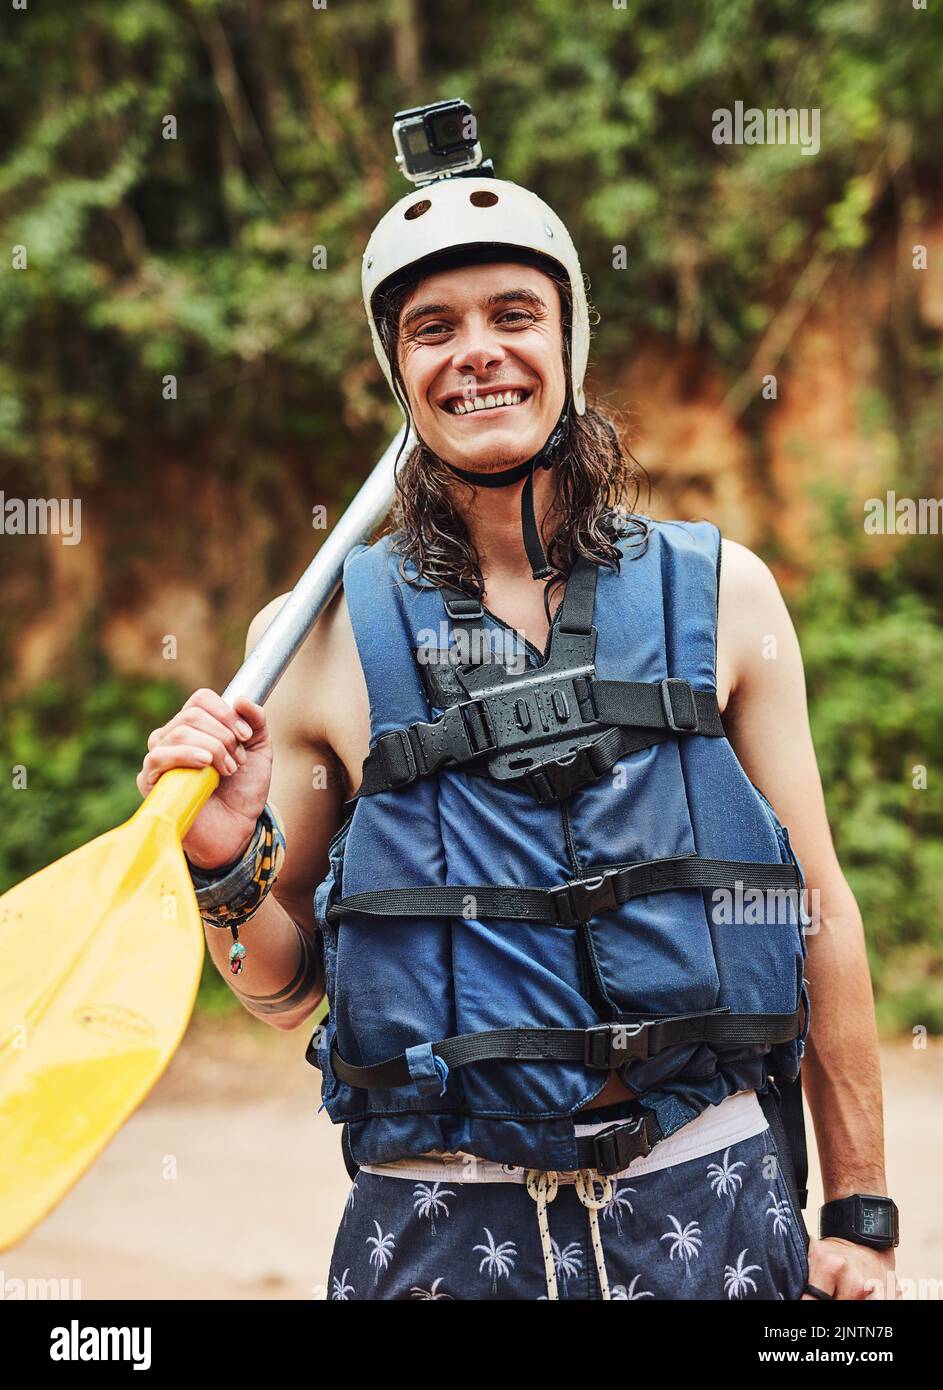 Life is an adventure, dare it. an adventurous young man wearing a helmet with a action camera attached. Stock Photo